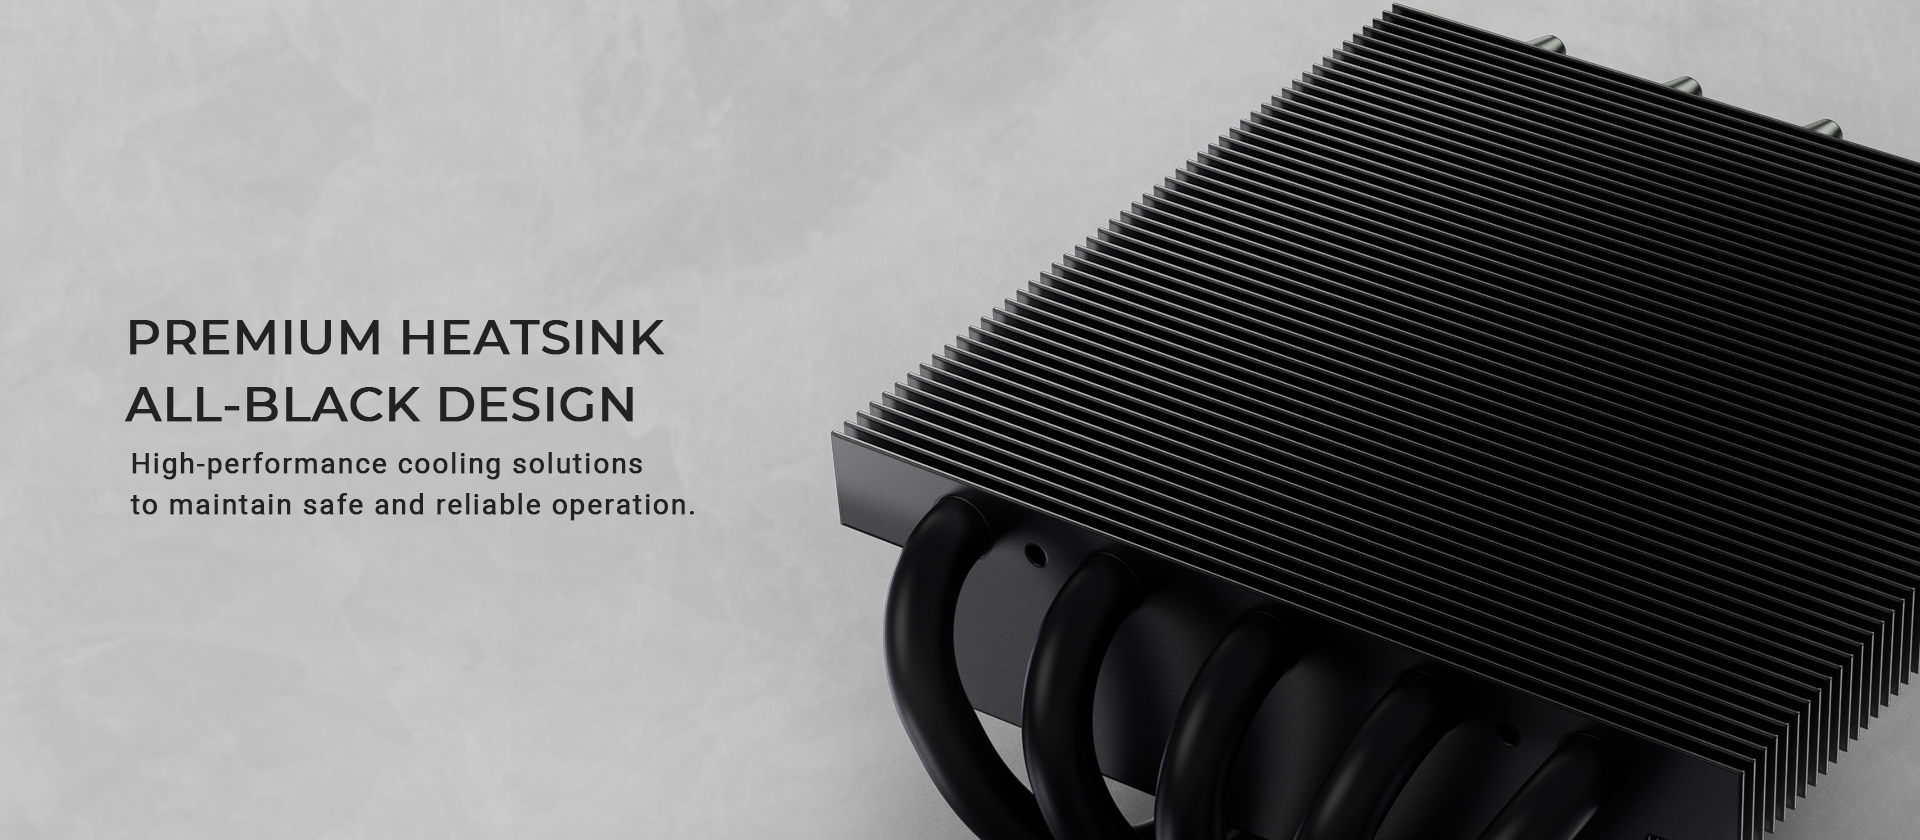 A large marketing image providing additional information about the product ID-COOLING Iceland Series IS-50X V3 Low Profile CPU Cooler - Additional alt info not provided